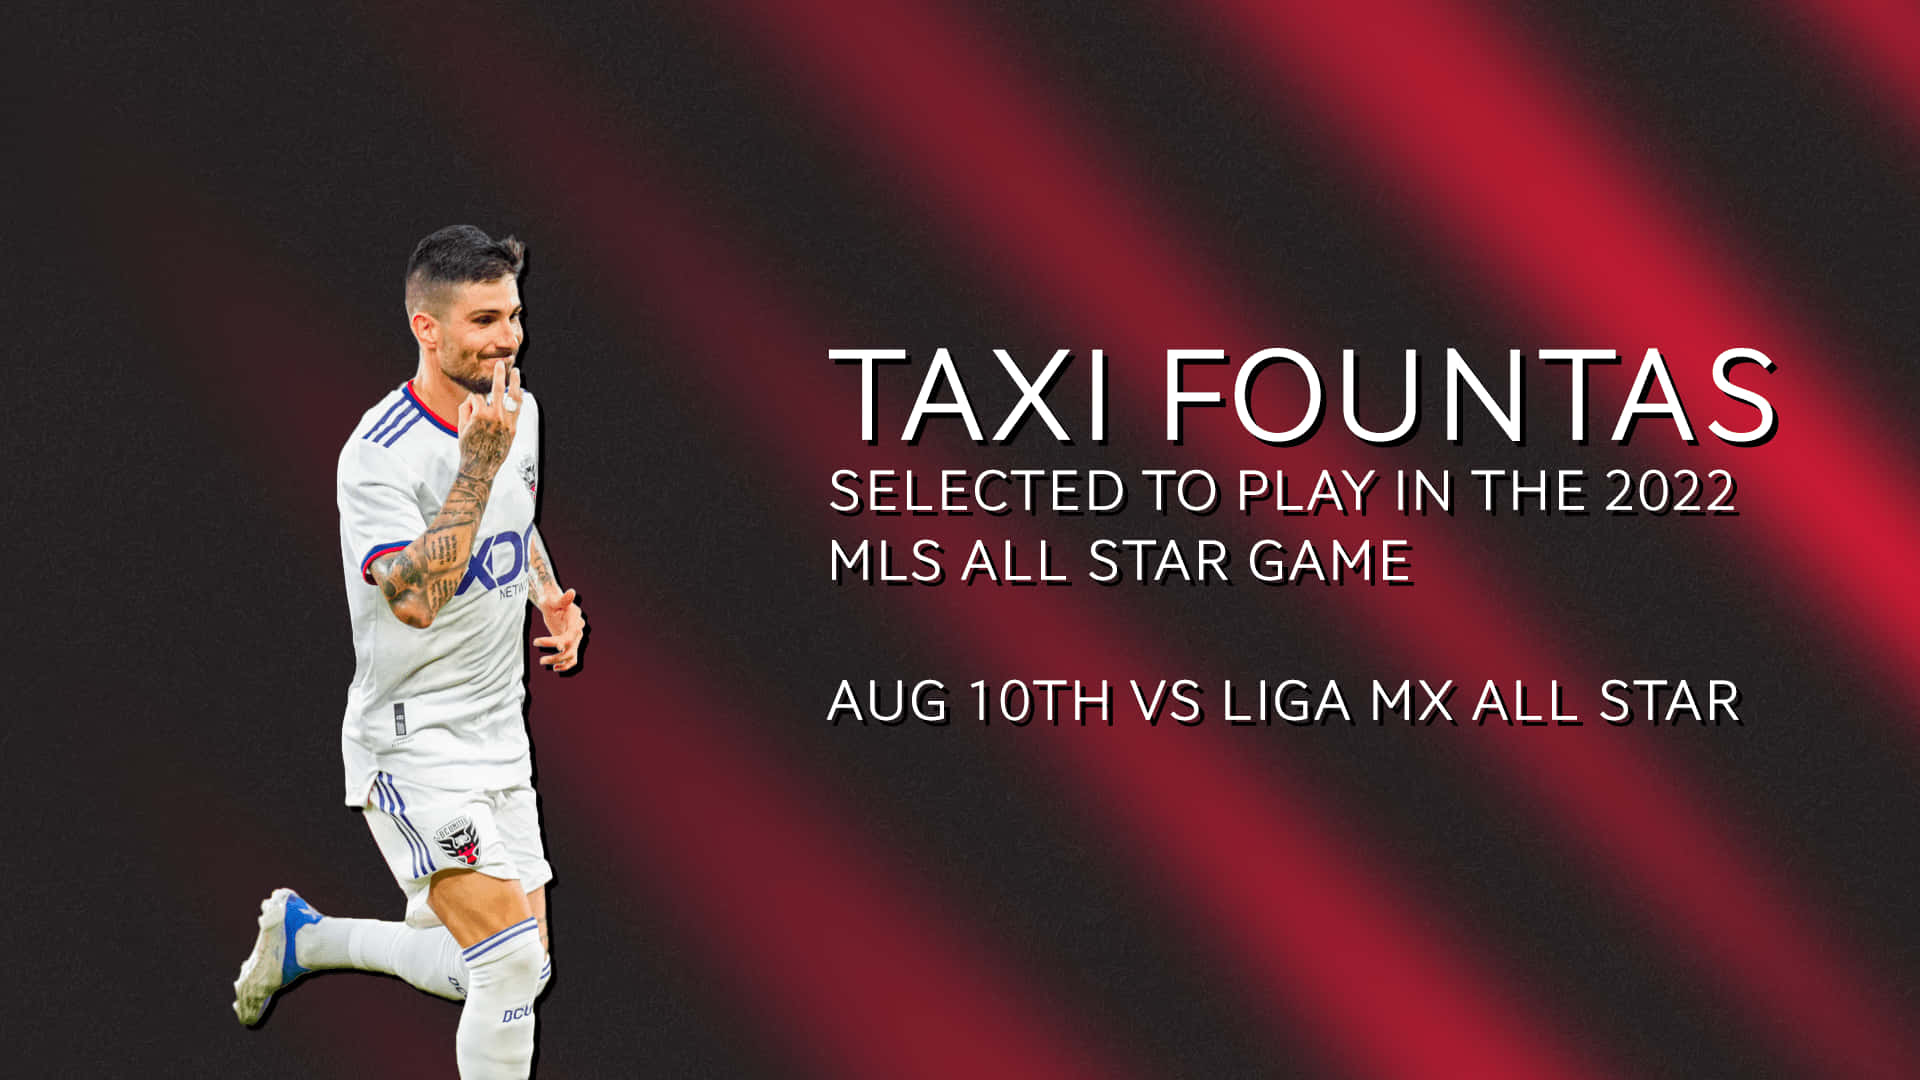 Taxiarchisfountas Mls All Star Game Wallpaper